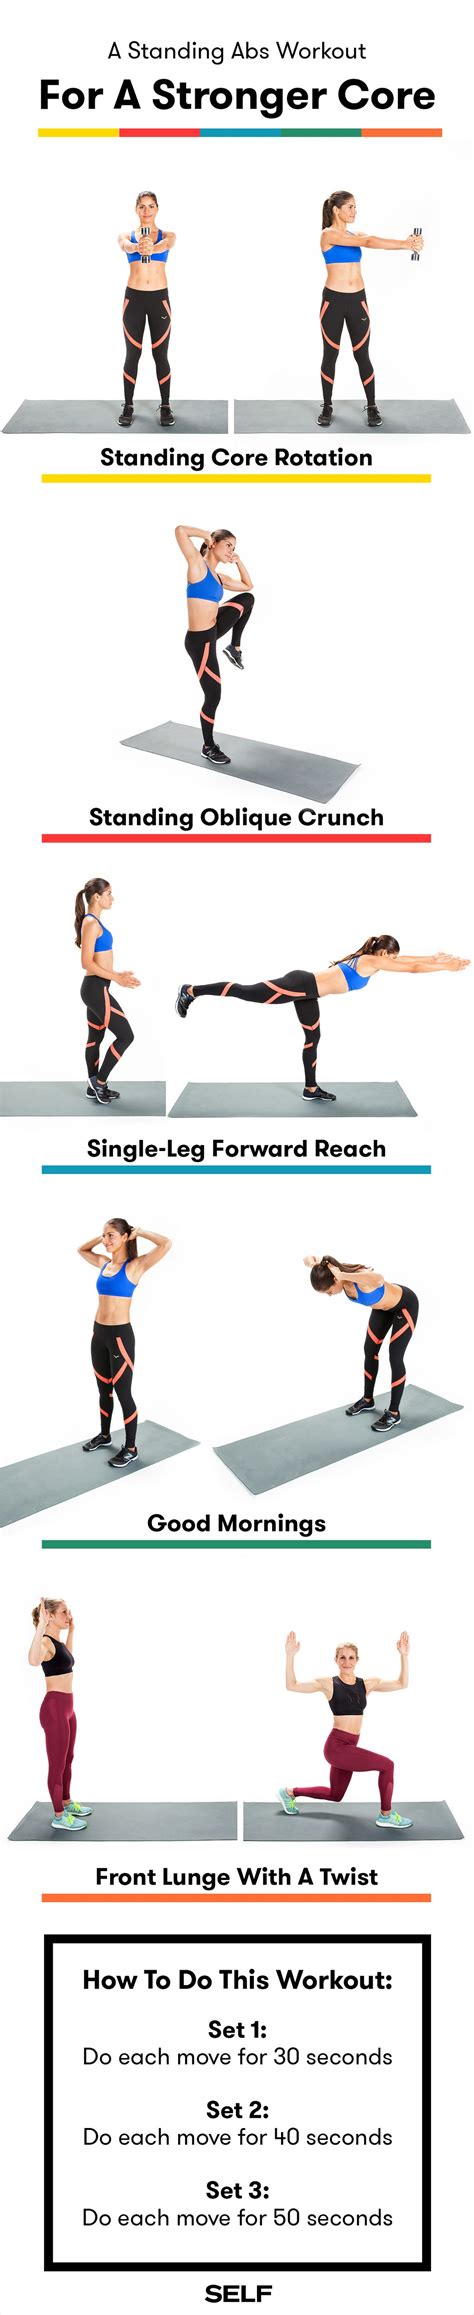 The Standing Abs Workout For A Strong Firm Core SELF